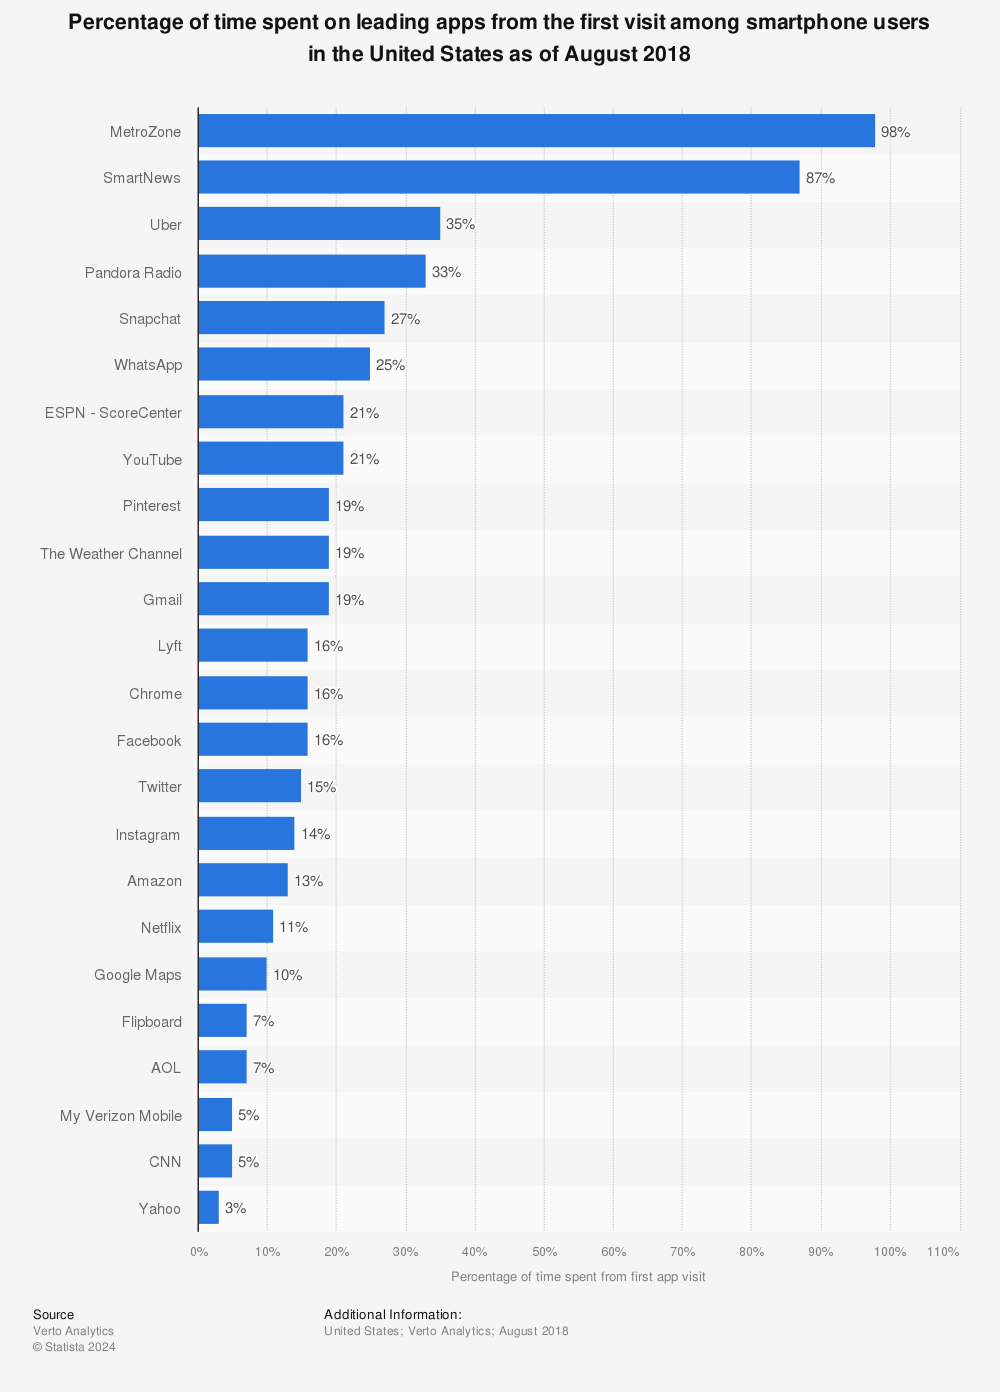 Statistic: Percentage of time spent on leading apps from the first visit among smartphone users in the United States as of August 2018 | Statista